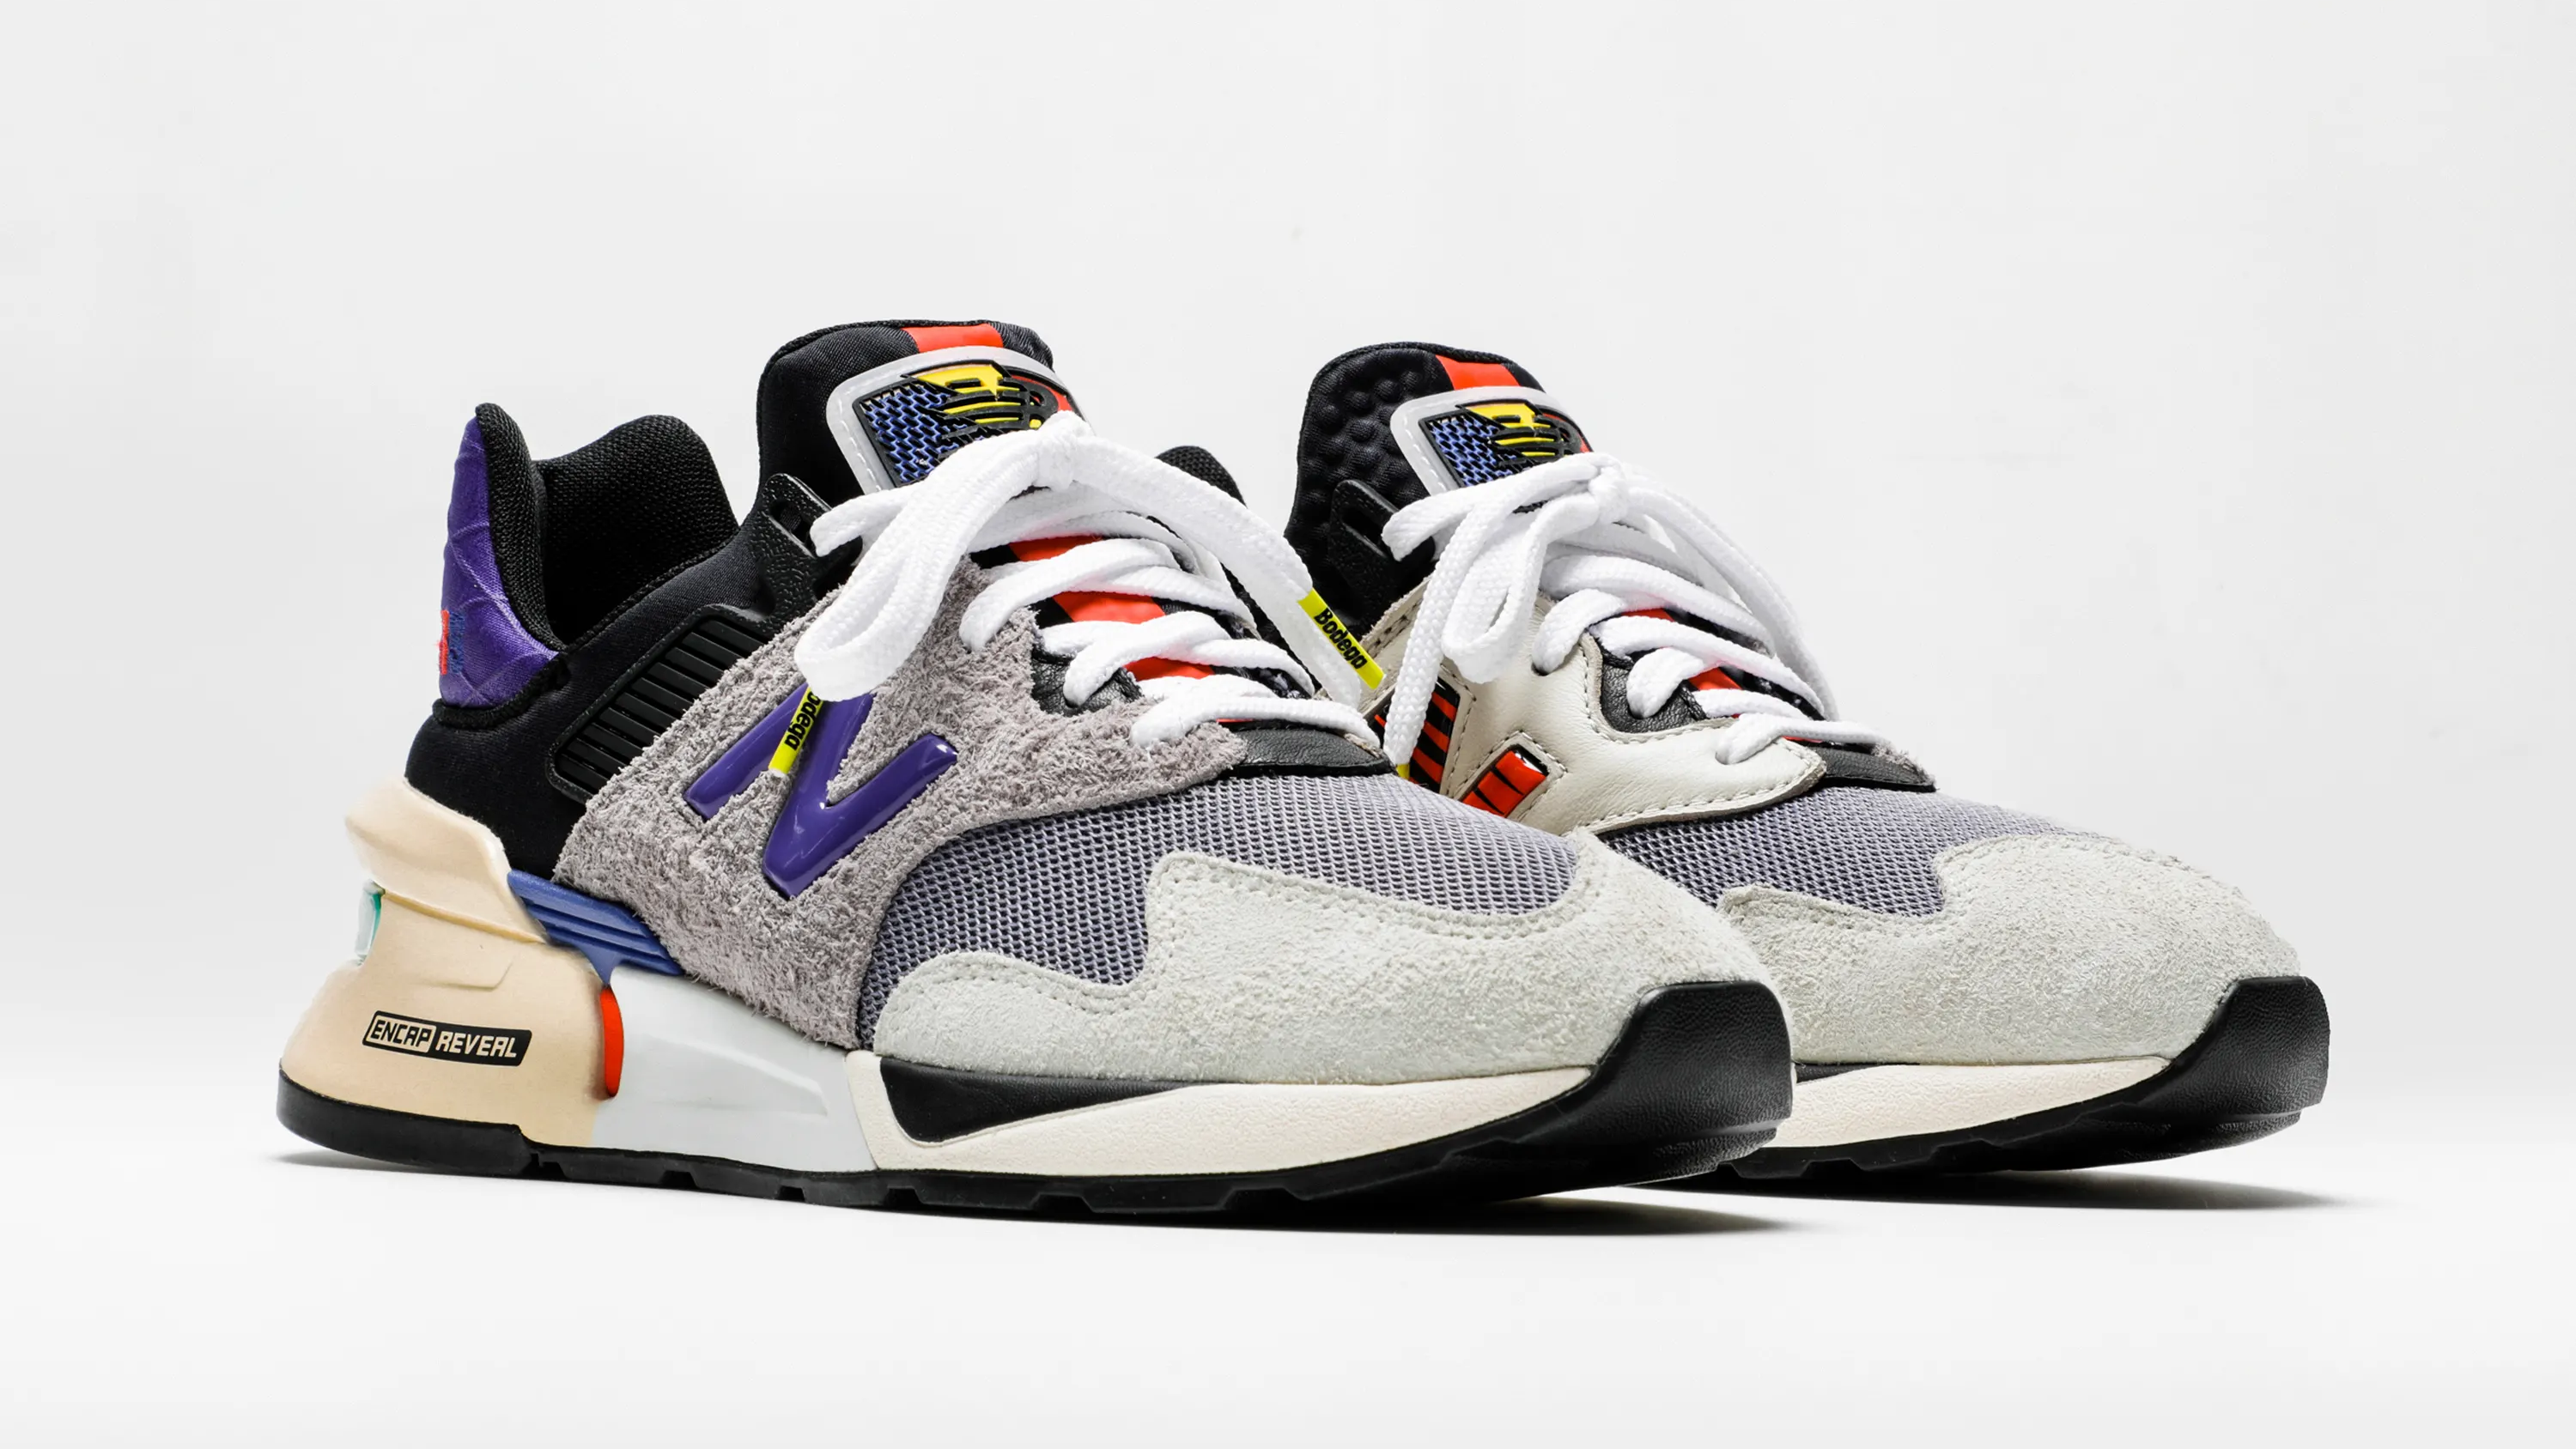 Get a Leg Up with the New Balance x Bodega Sneaker Selection